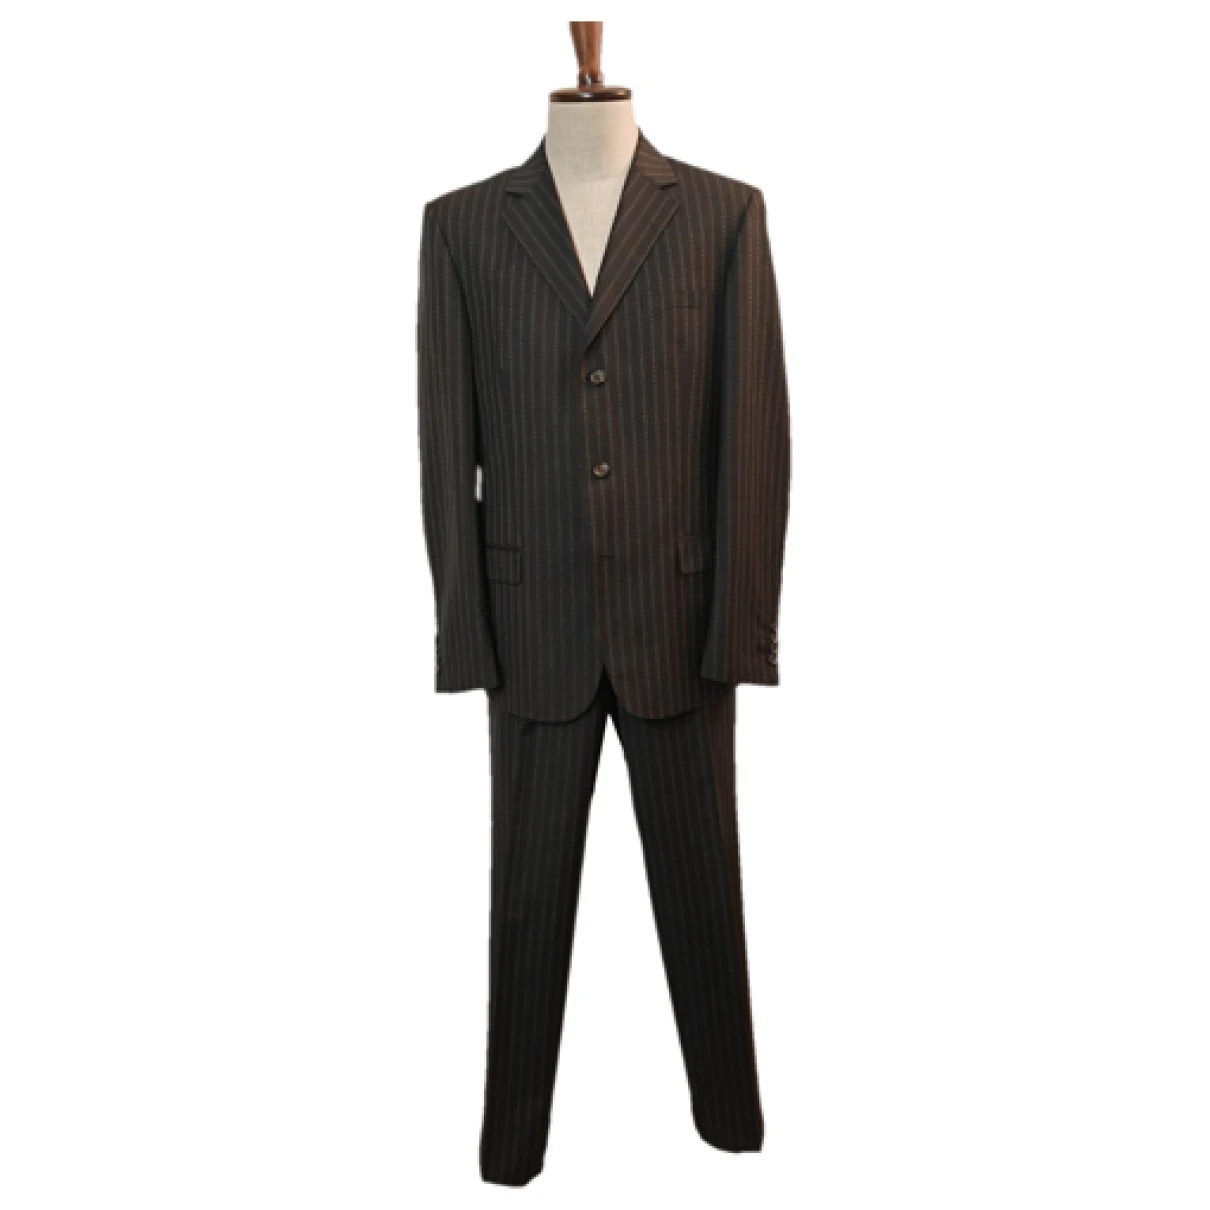 clothing Gucci suits for Male Wool 52 IT. Used condition